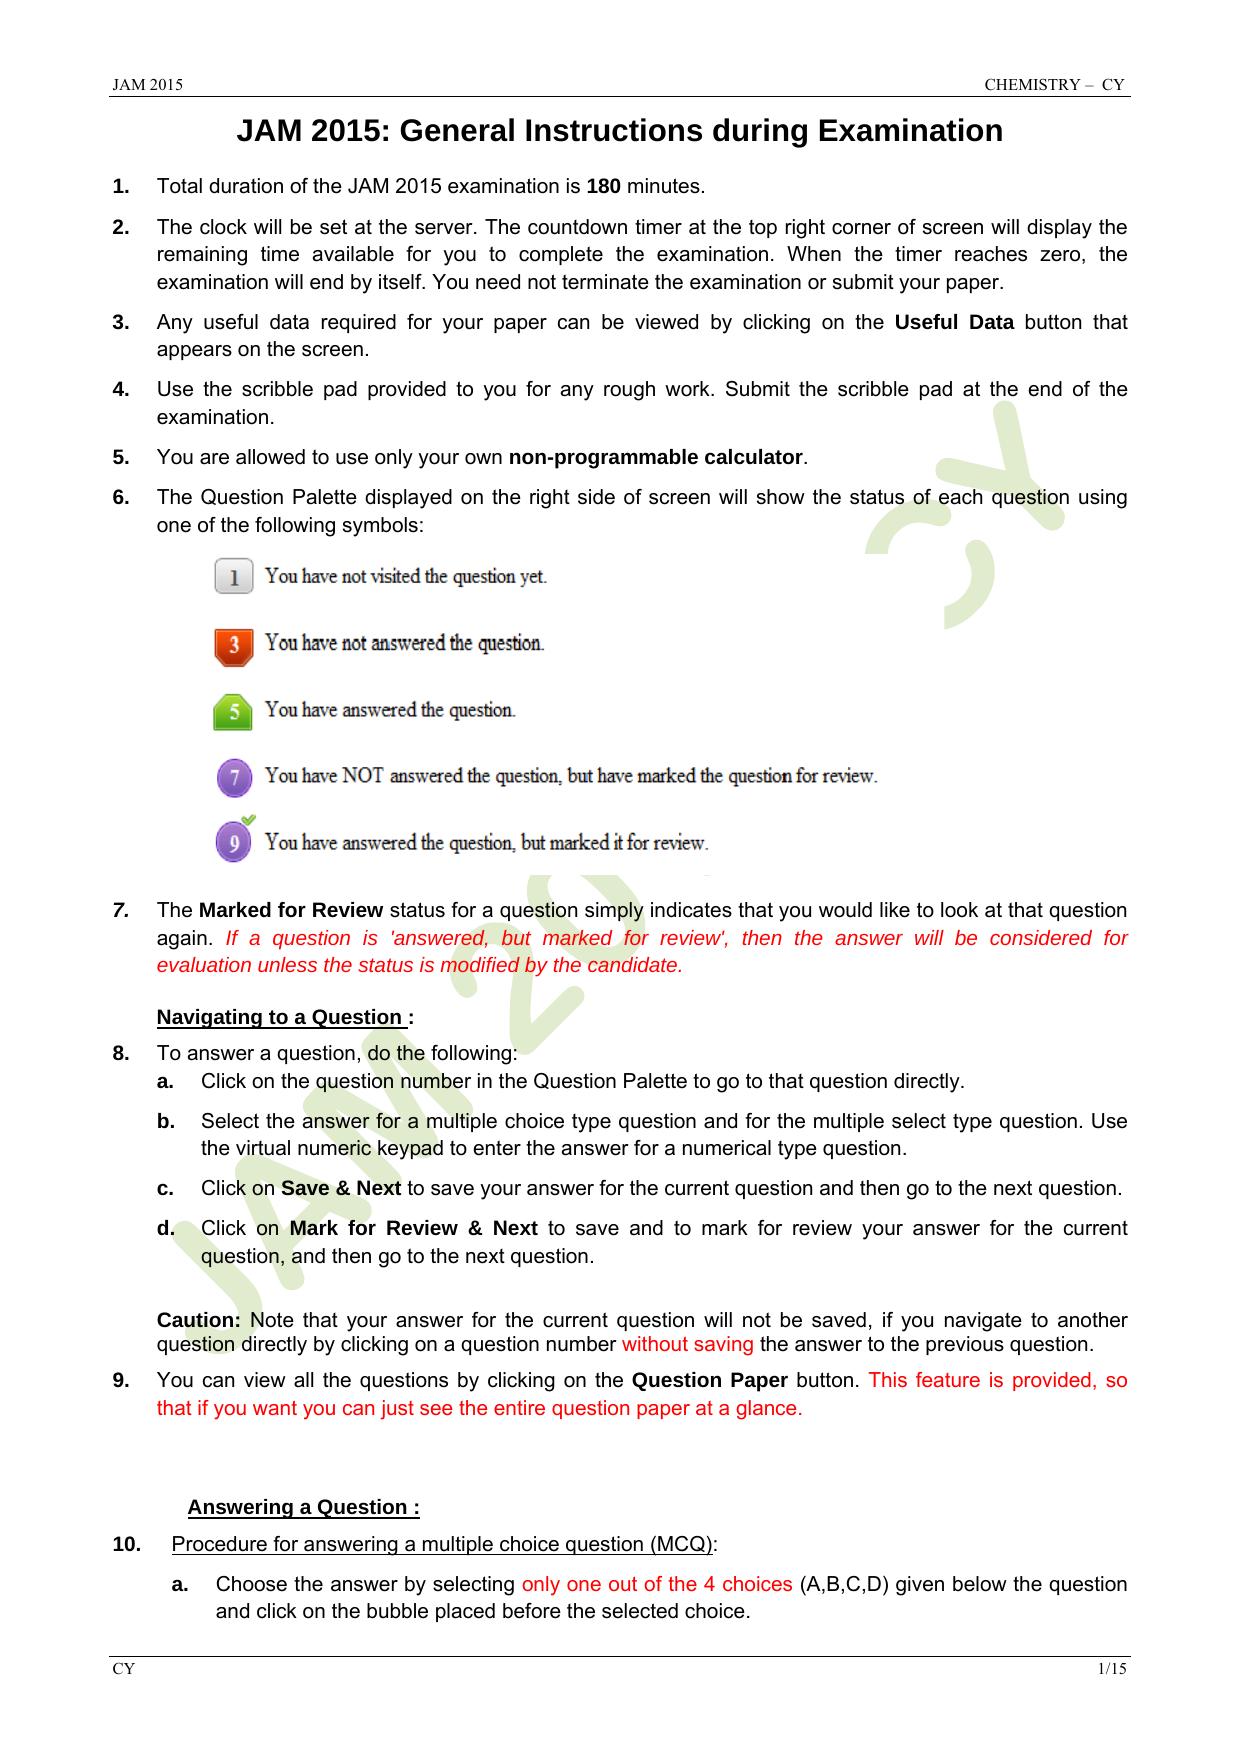 JAM 2015: CY Question Paper - Page 1